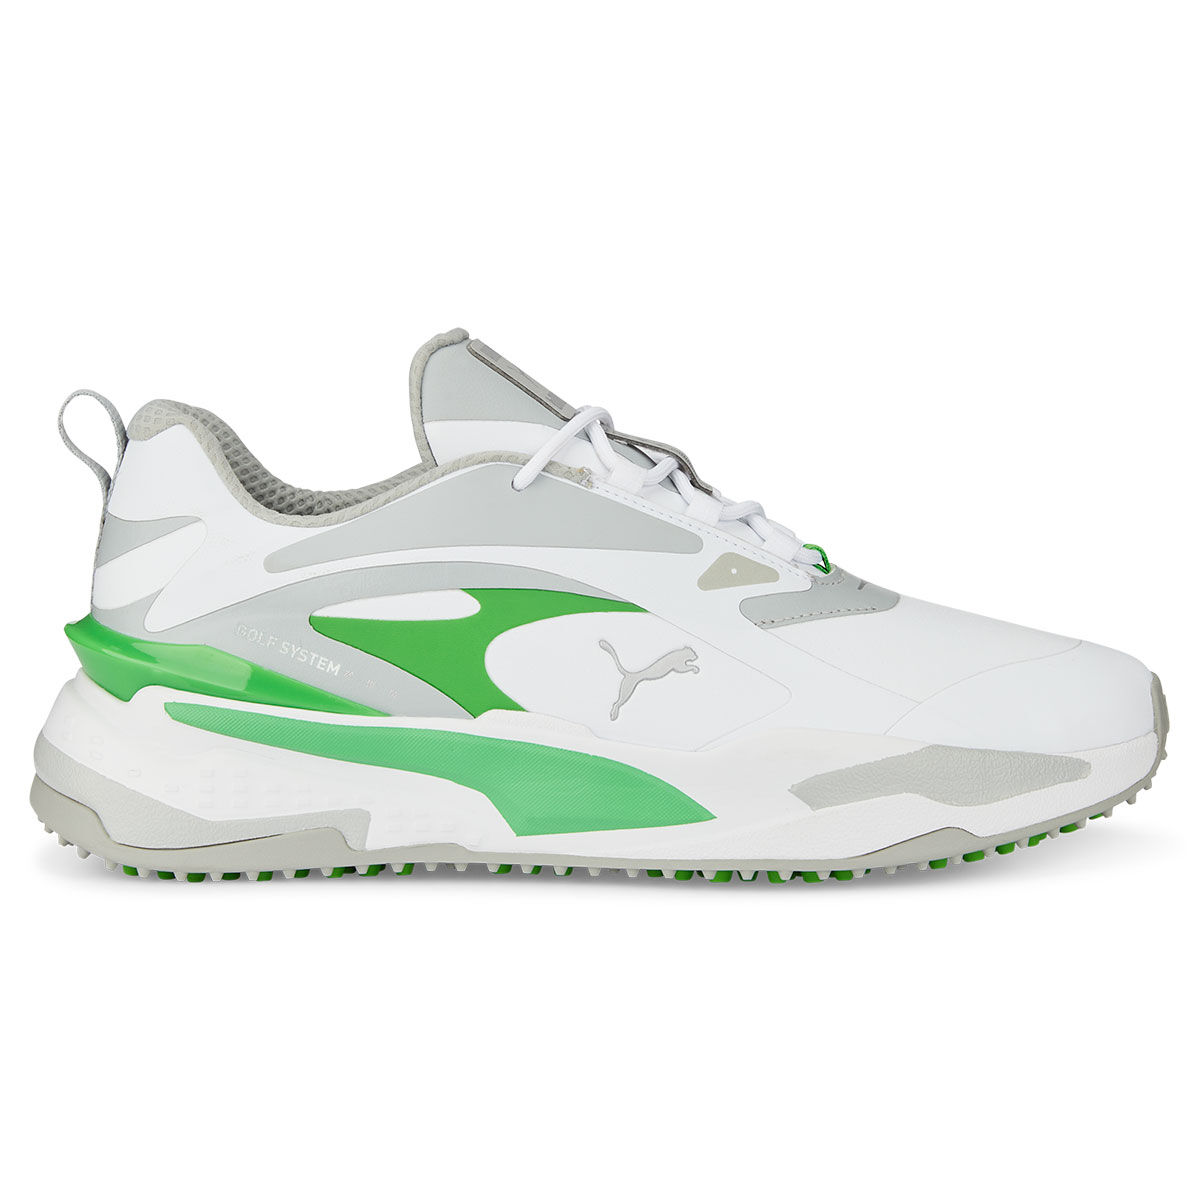 PUMA Golf Men’s White, Grey and Green Waterproof GS-Fast Spikeless Golf Shoes, Size: 10 | American Golf